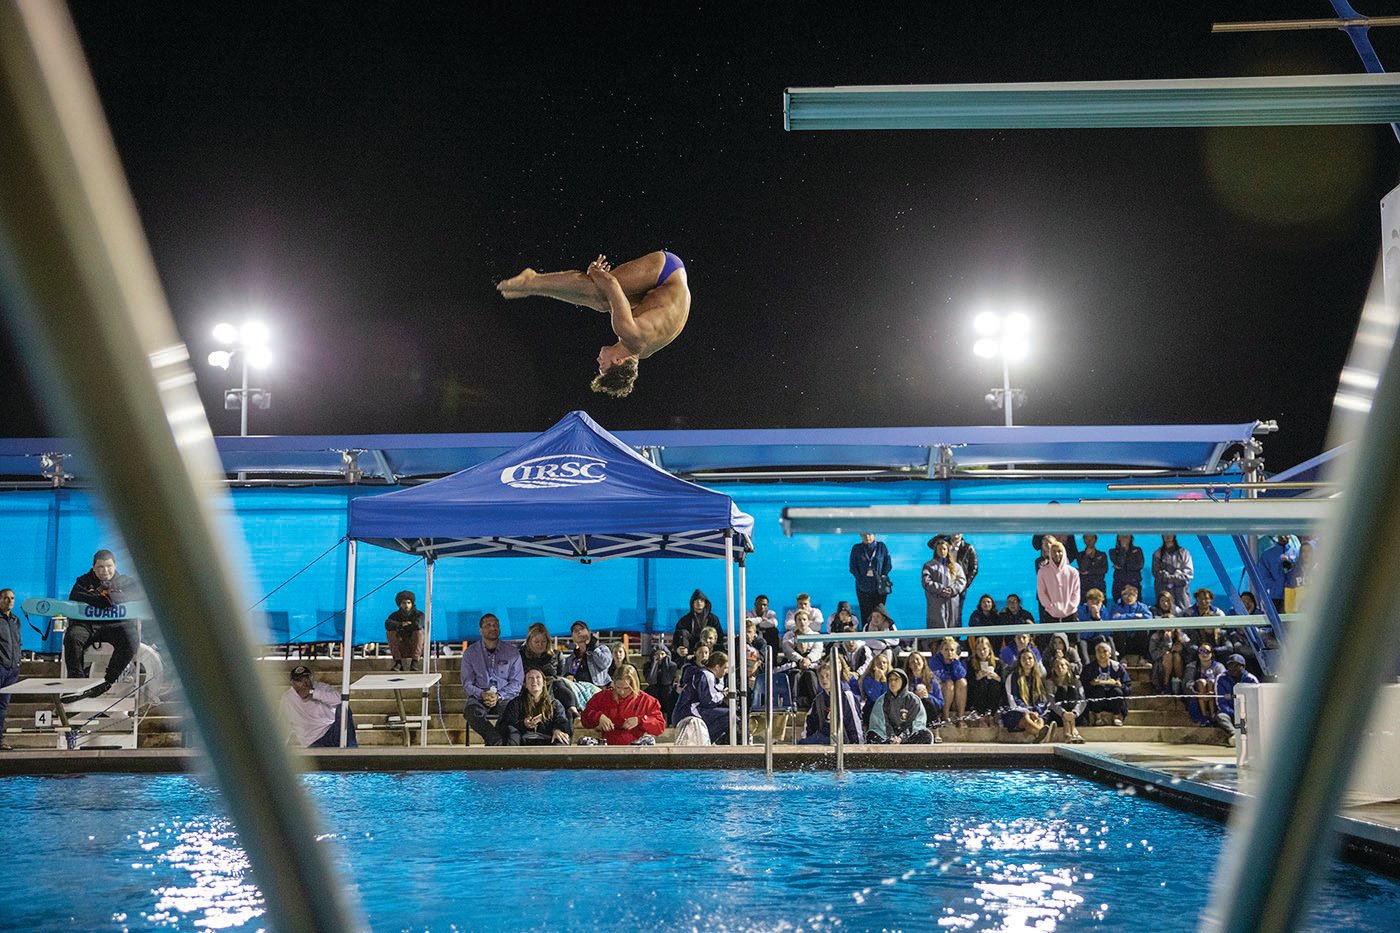 Indian River State College will host the 2021 National Junior College Athletic Association (NJCAA) Swimming and Diving National Championships at the IRSC Anne Wilder Aquatic Complex on the IRSC Main Campus in Fort Pierce Wednesday, April 28 through Saturday, May 1 where the College looks to extend its unprecedented National Championship winning streak. Shown here is IRSC diver Jake Servaites on the 1-meter board at last year’s meet on Saturday, March 7, 2020 at IRSC.